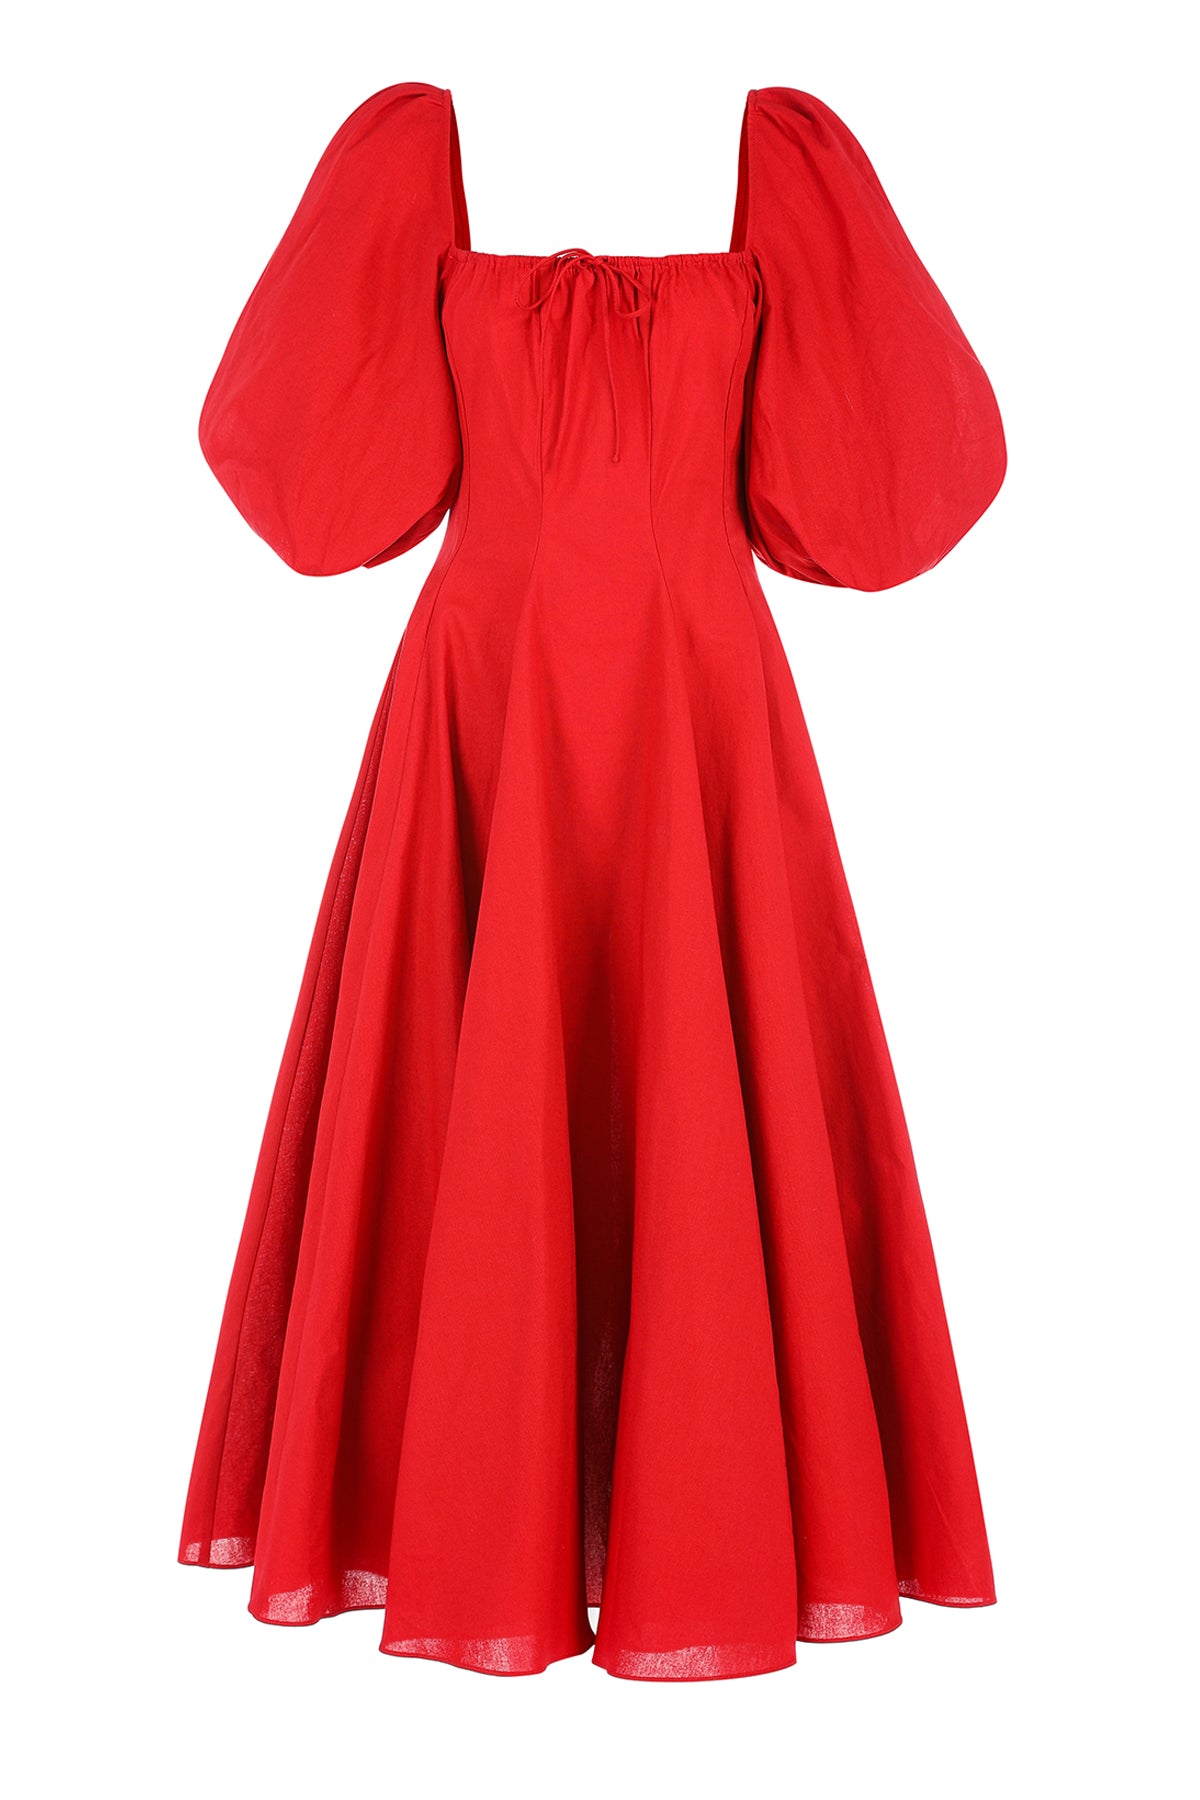 The Red Day Dress – Selkie